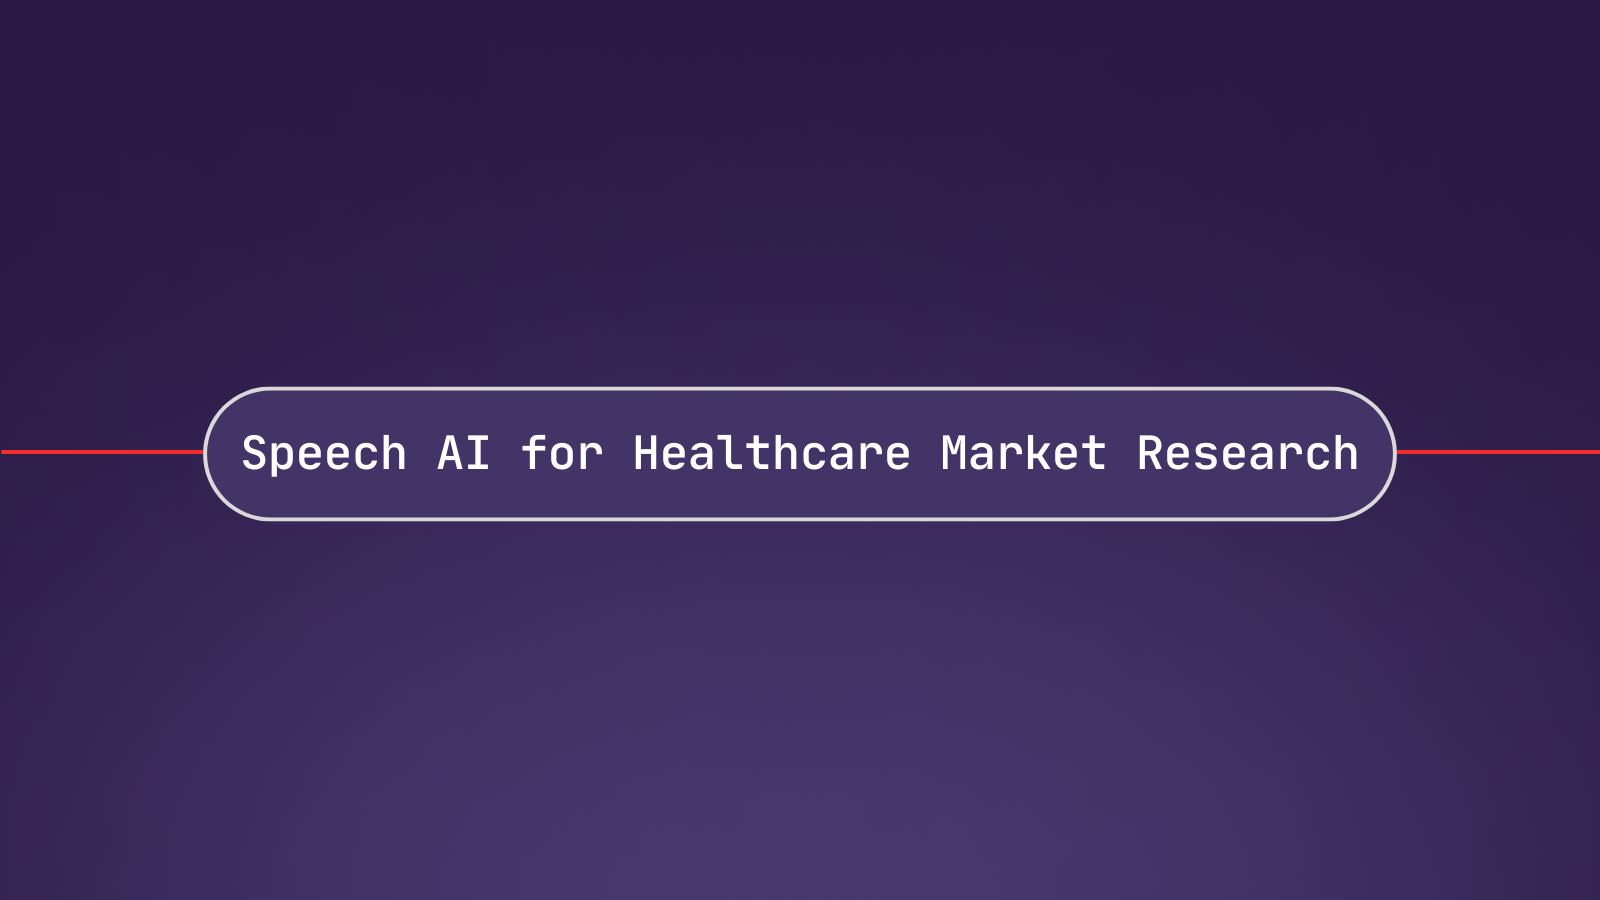 How to Use Speech AI for Healthcare Market Research